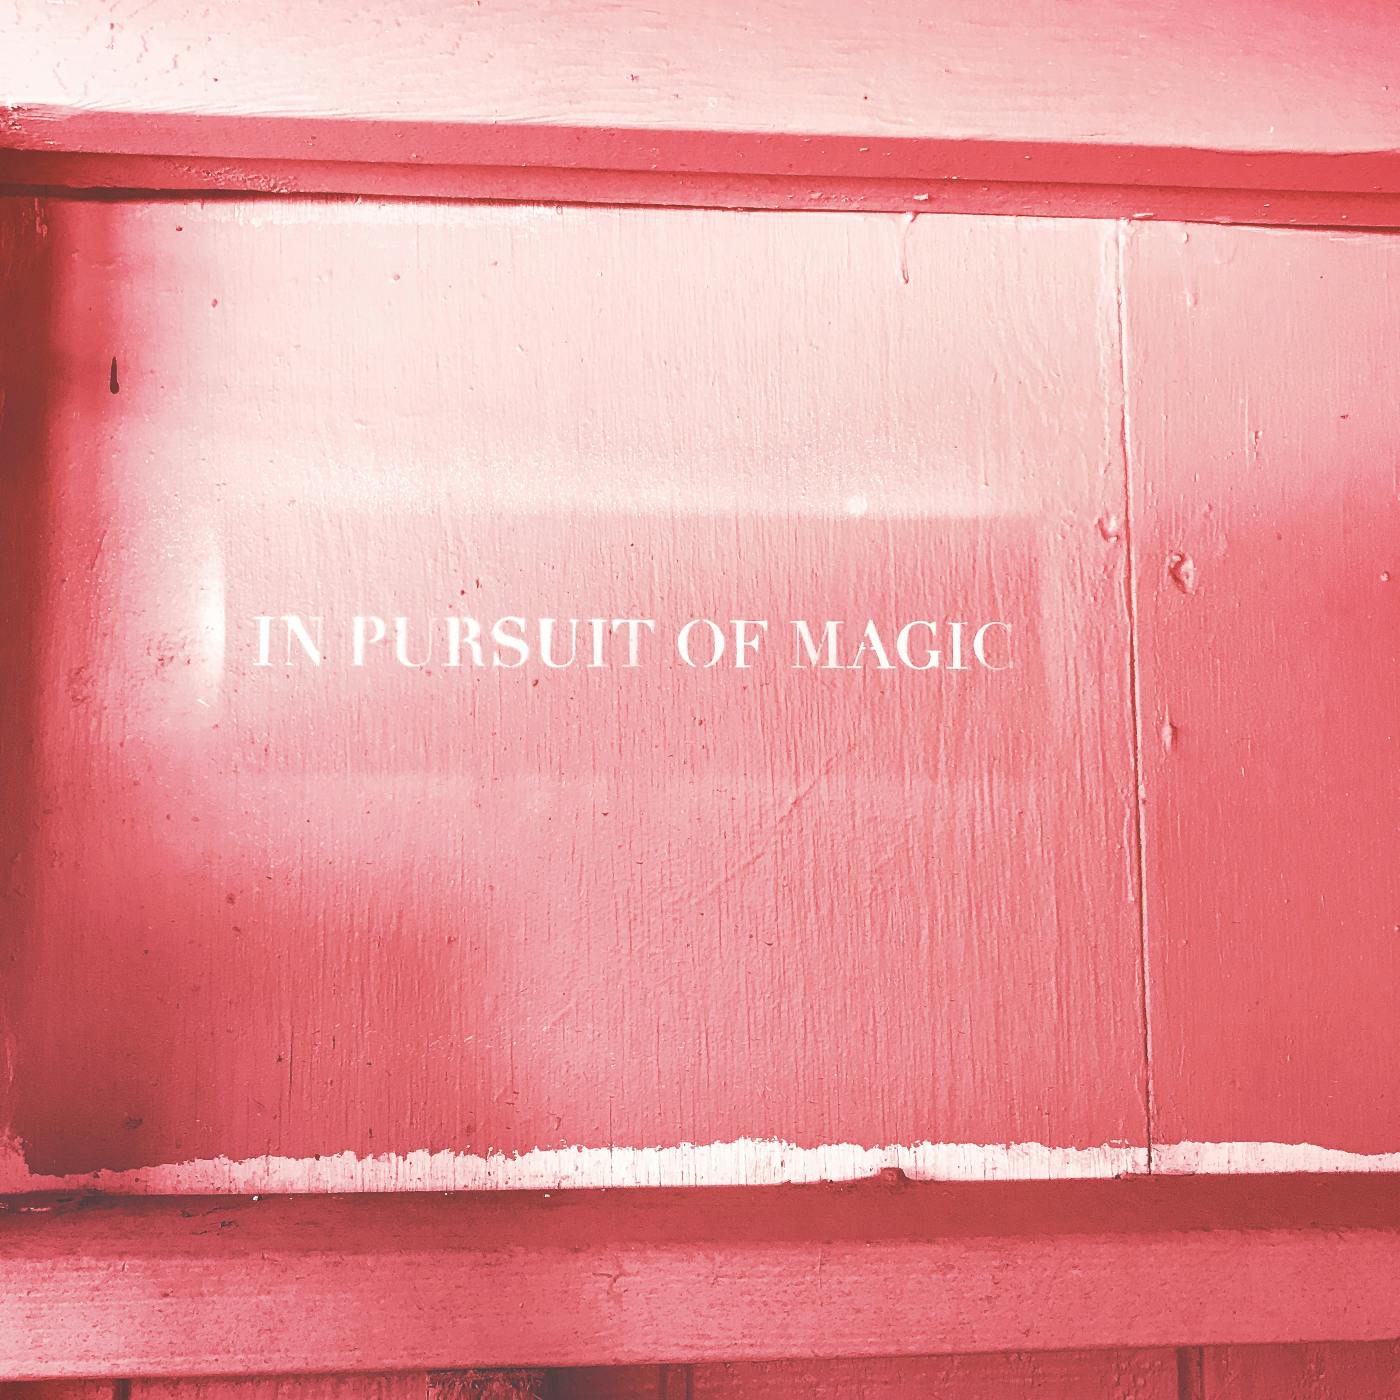 A red wall with In Pursuit of Magic written on it.